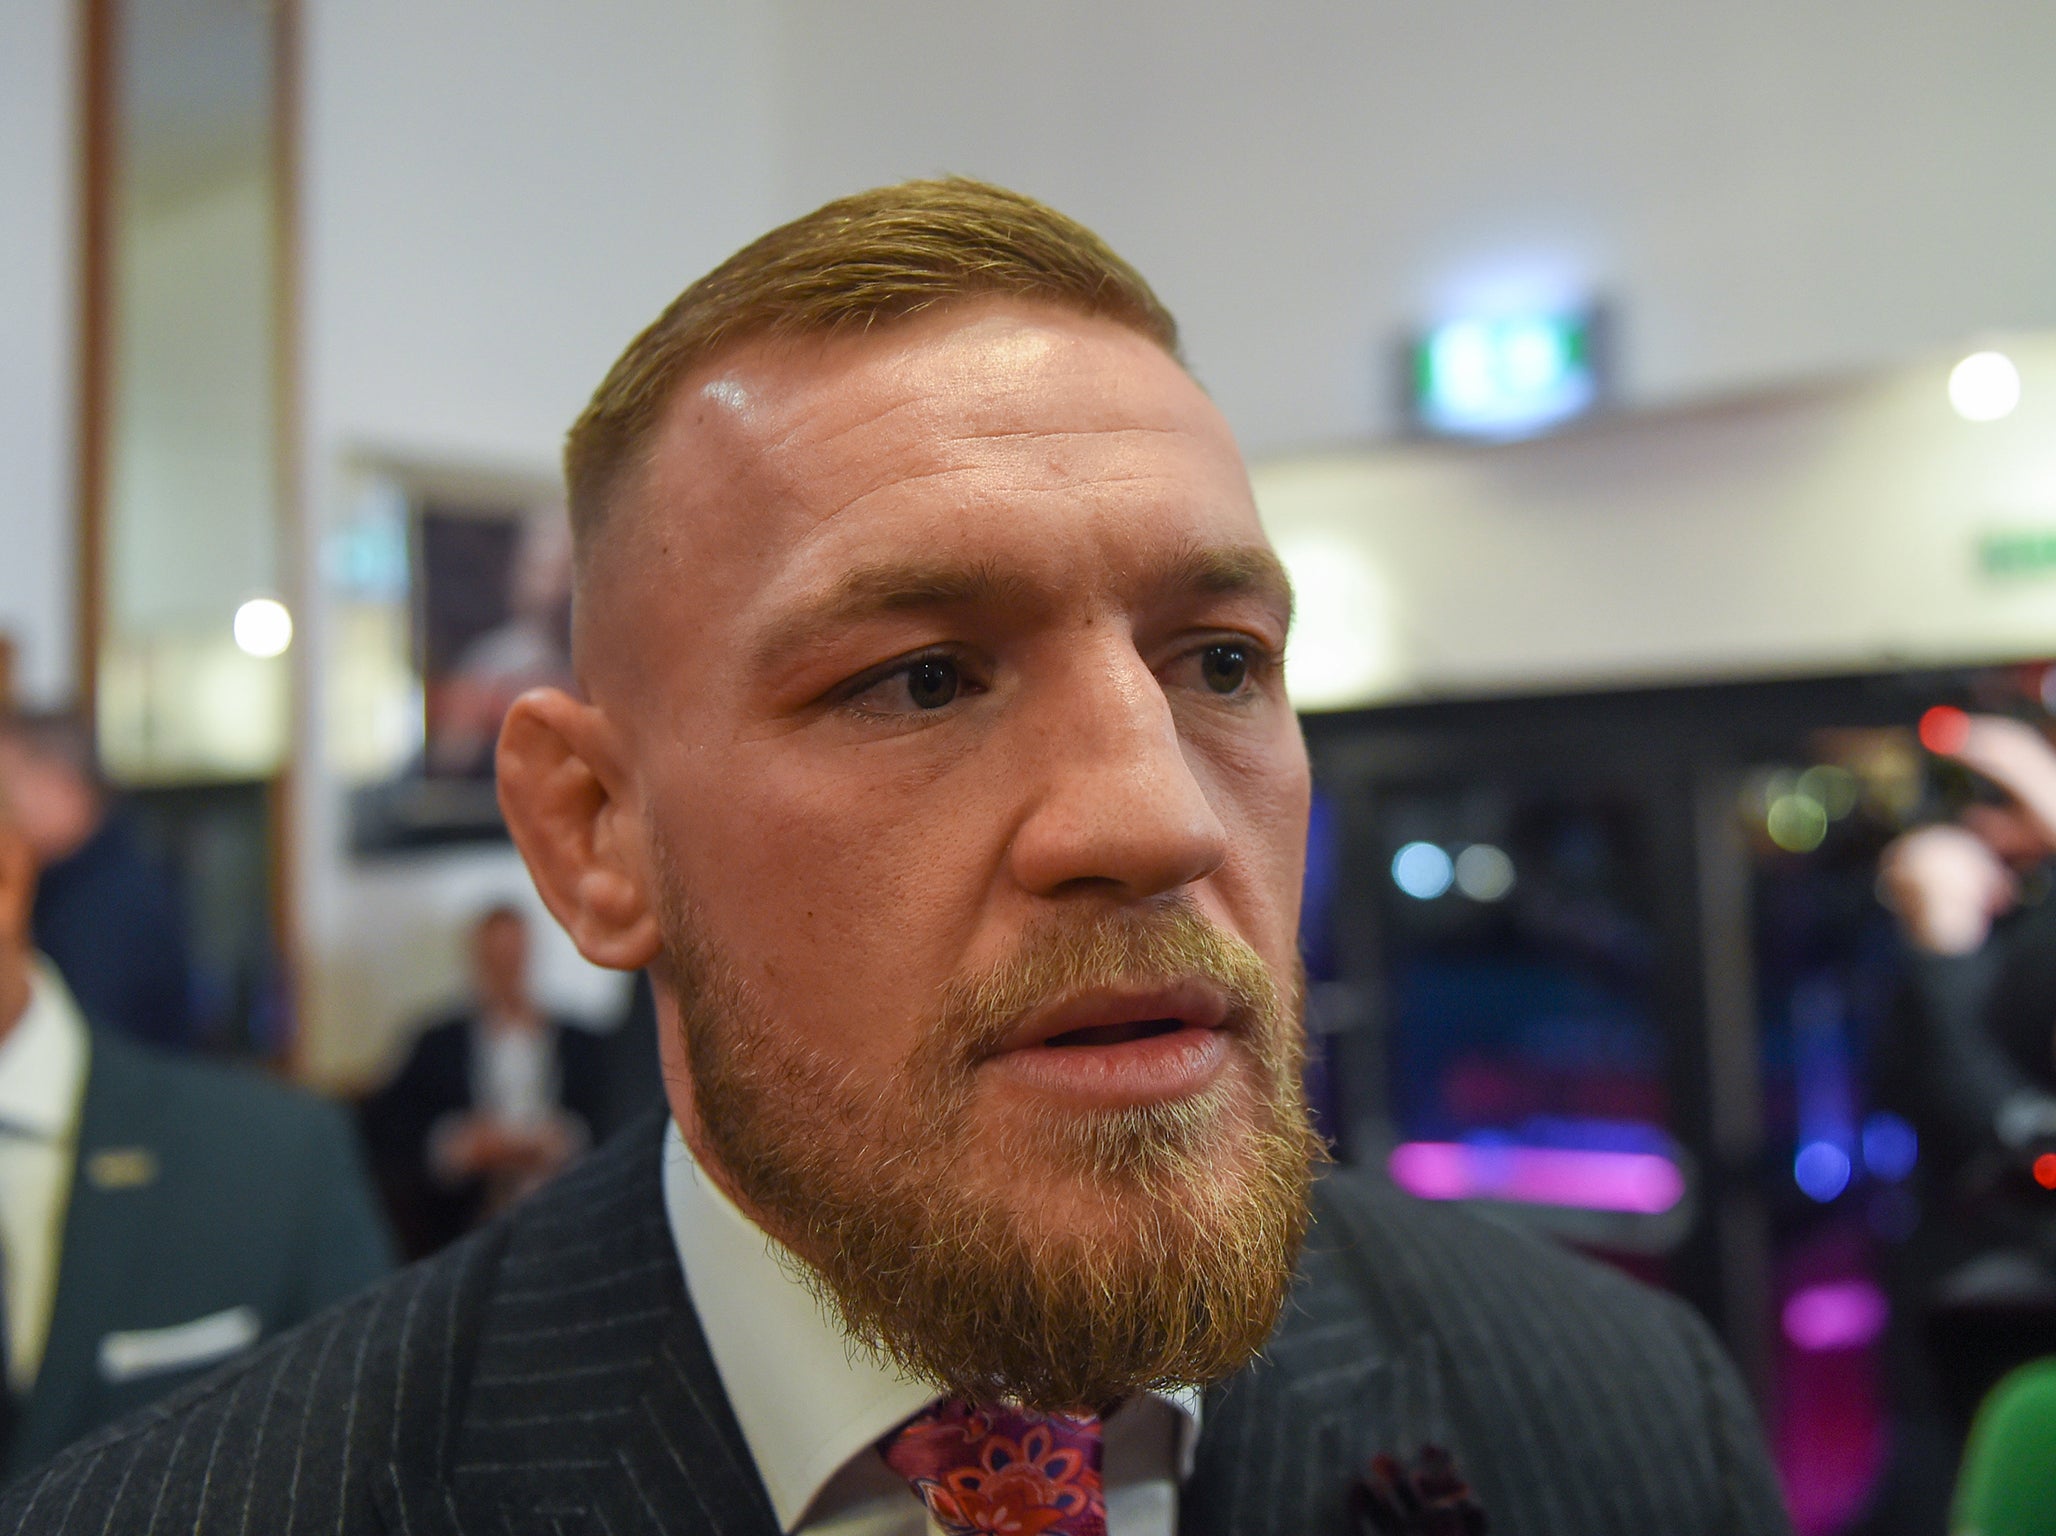 McGregor is likely to be hit with a hefty fine and possibly a ban